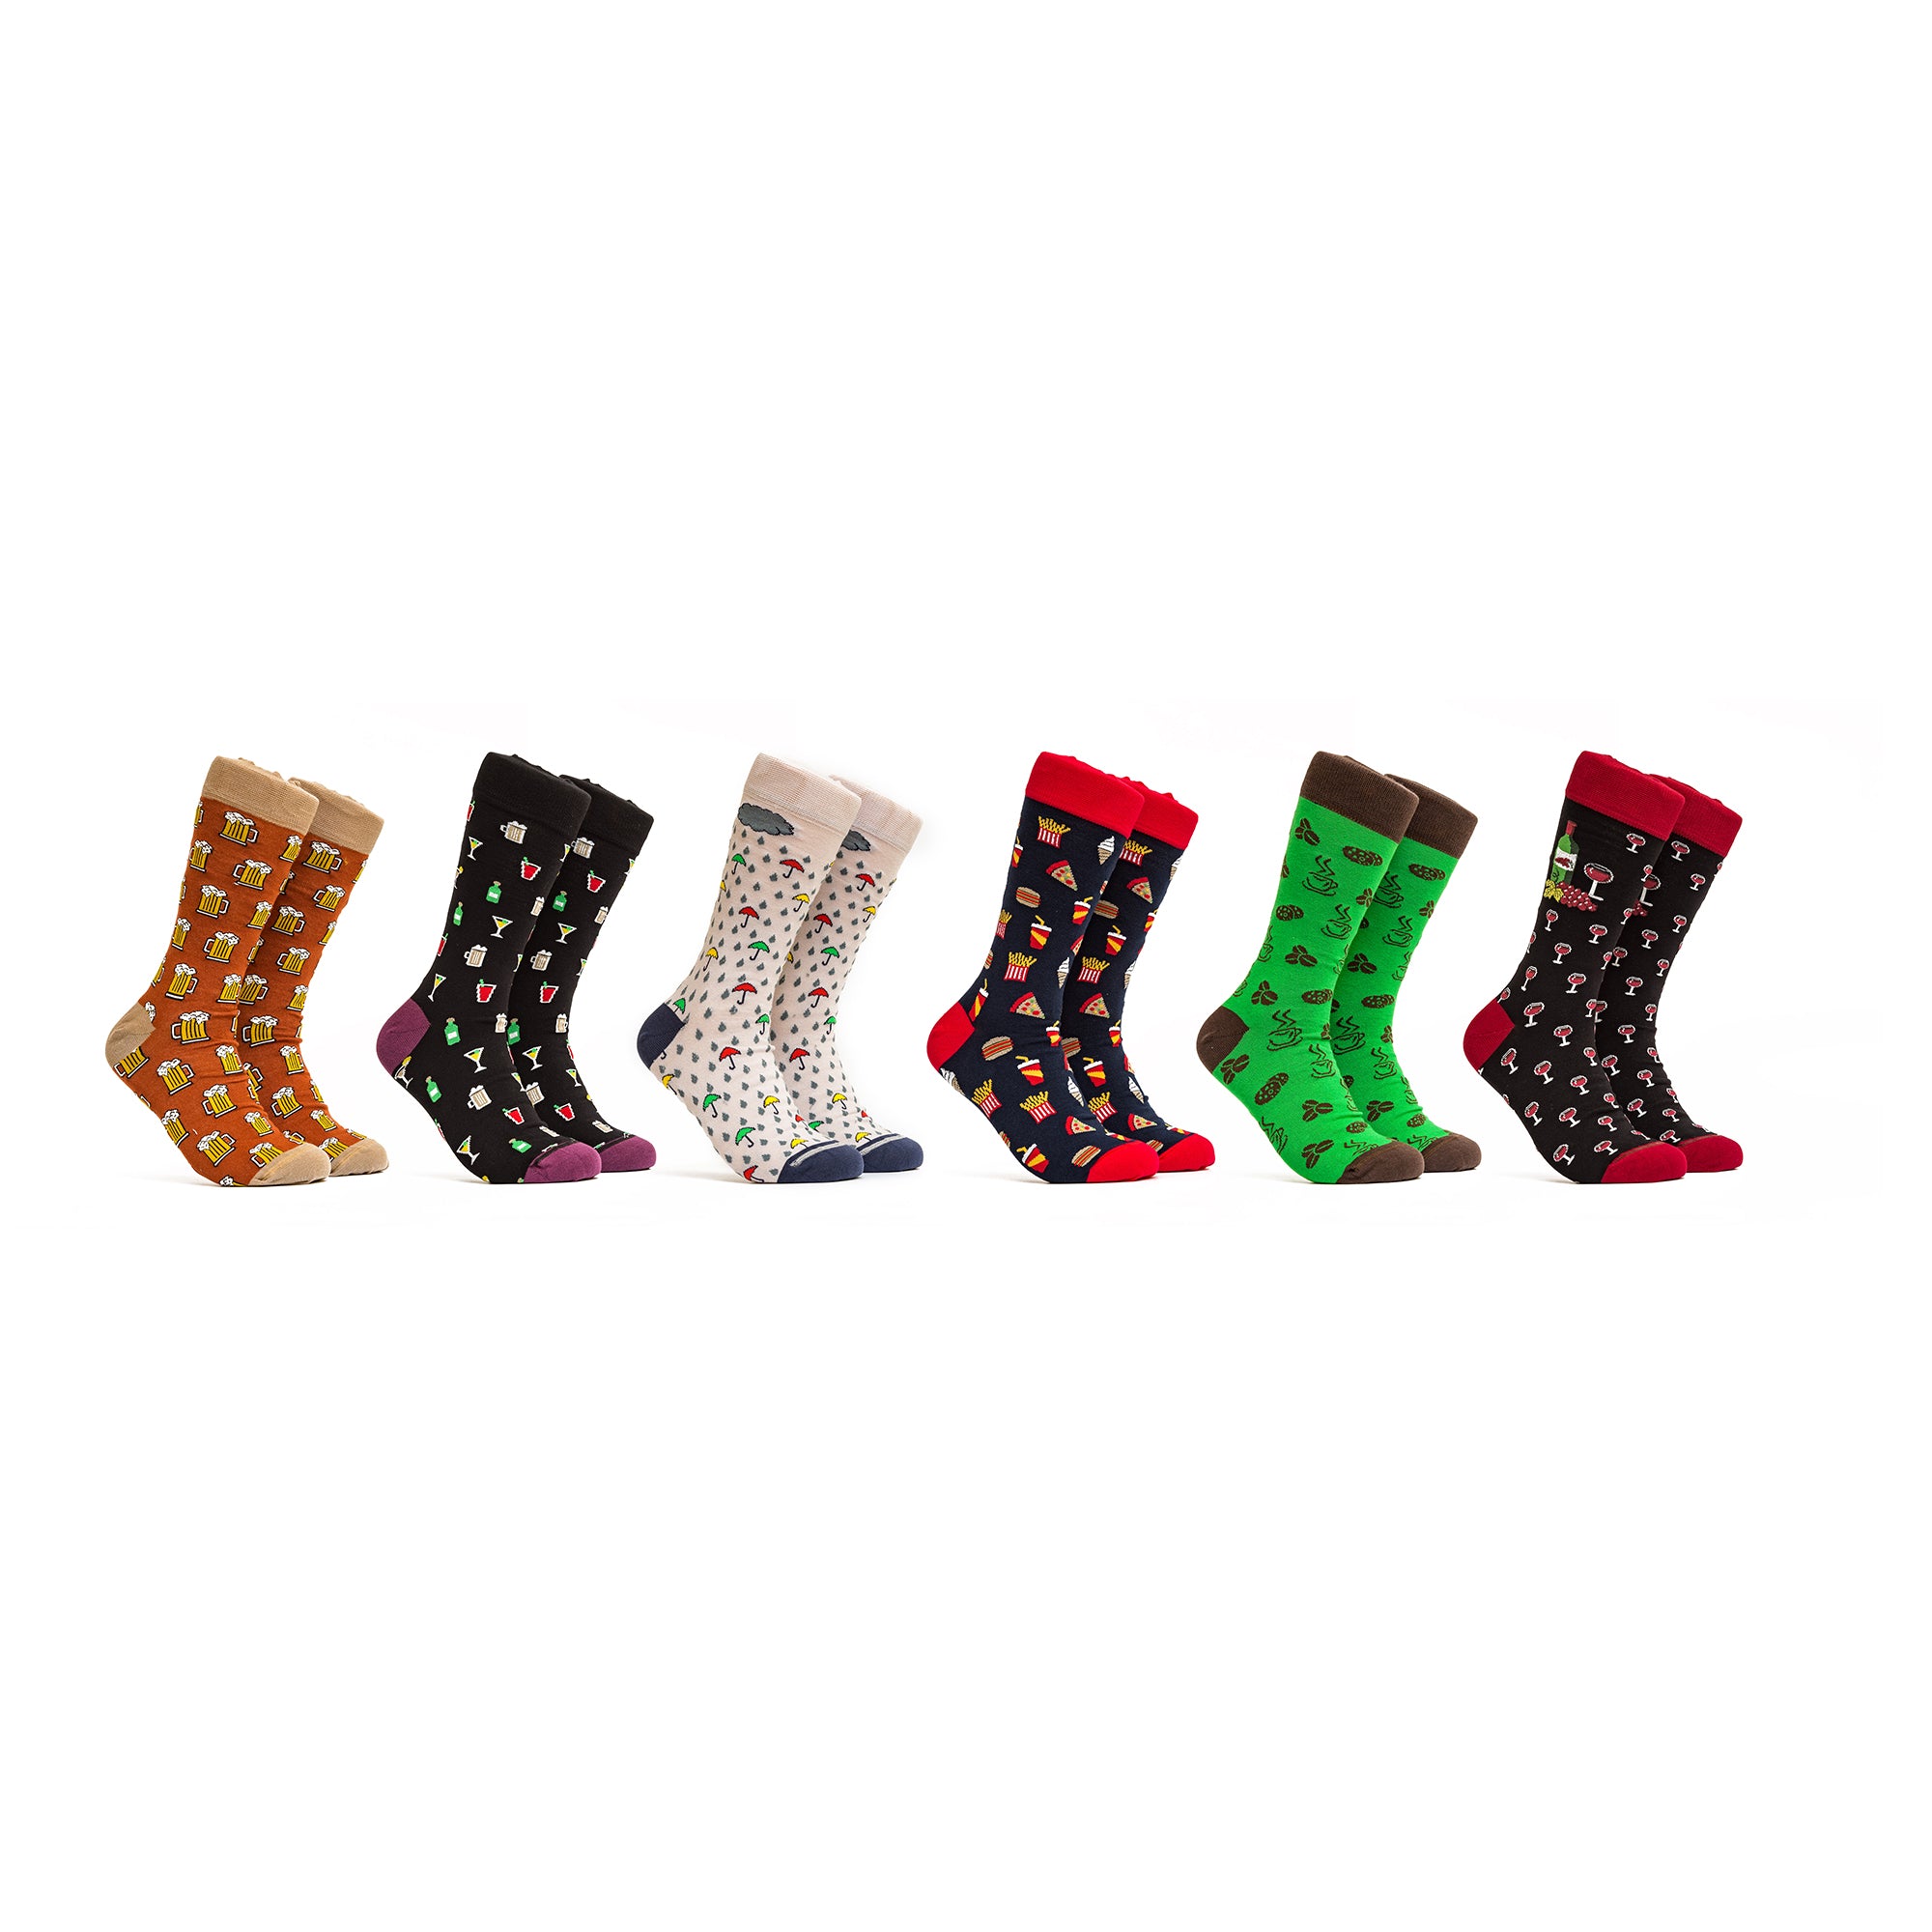 Drinks and Food Socks - Colors Brown, Blue, Grey, Green and Black - 6 pairs